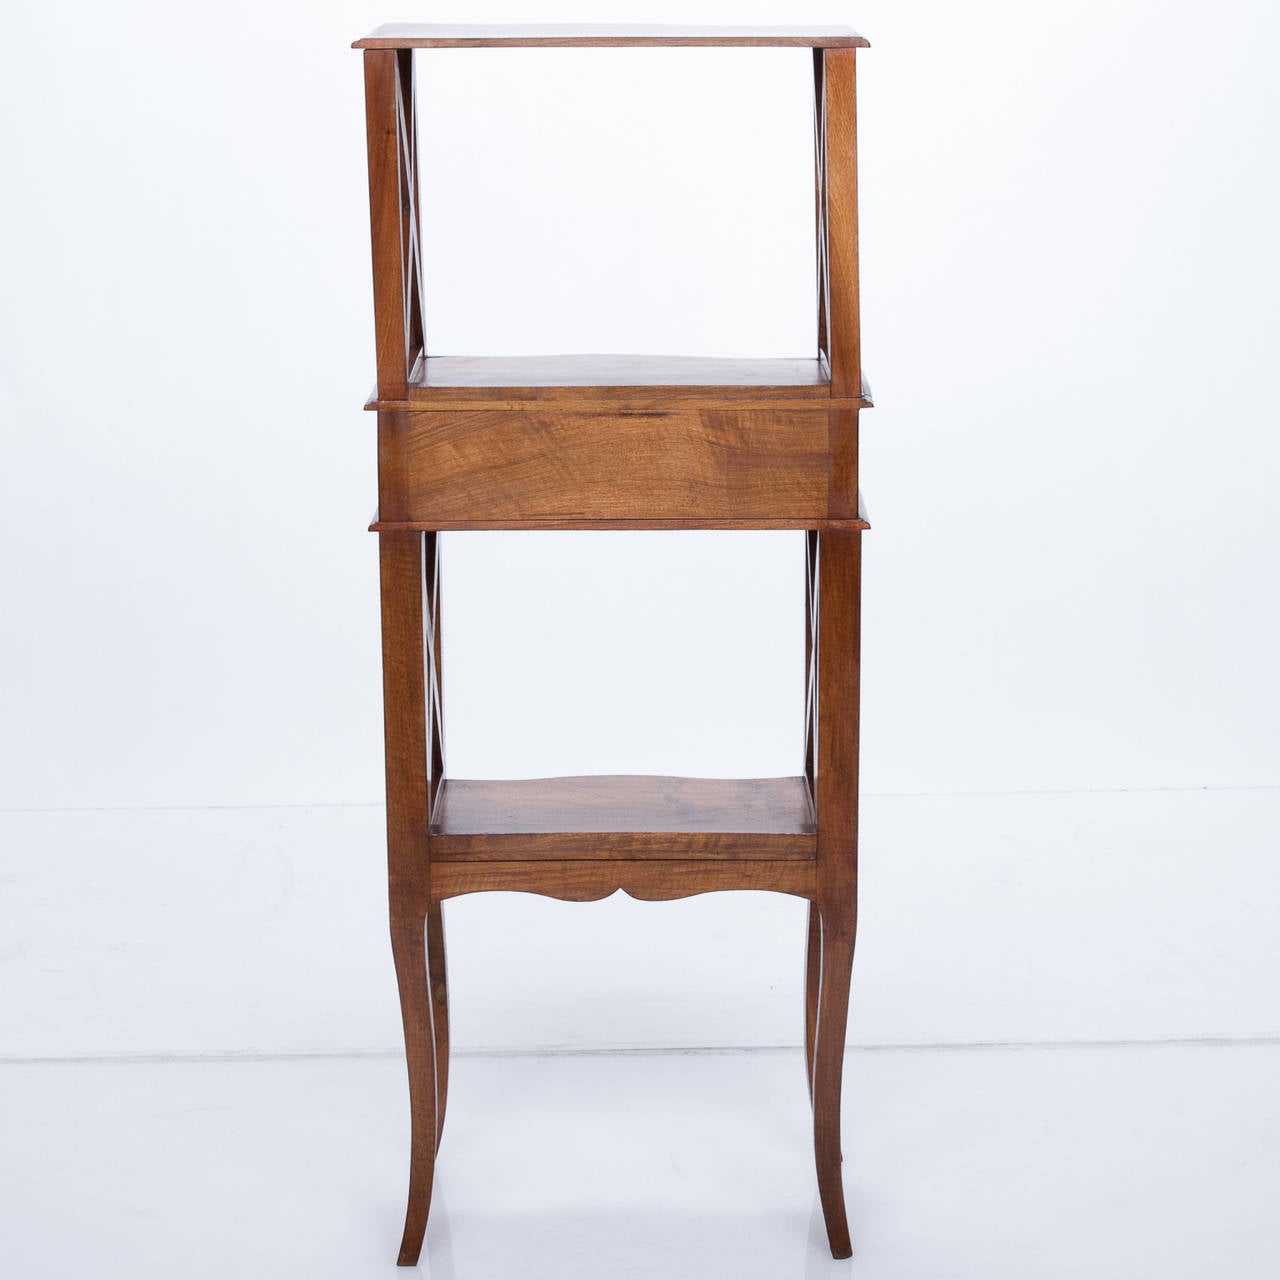 Empire Provincial Walnut Standing Etagere from the 19th Century